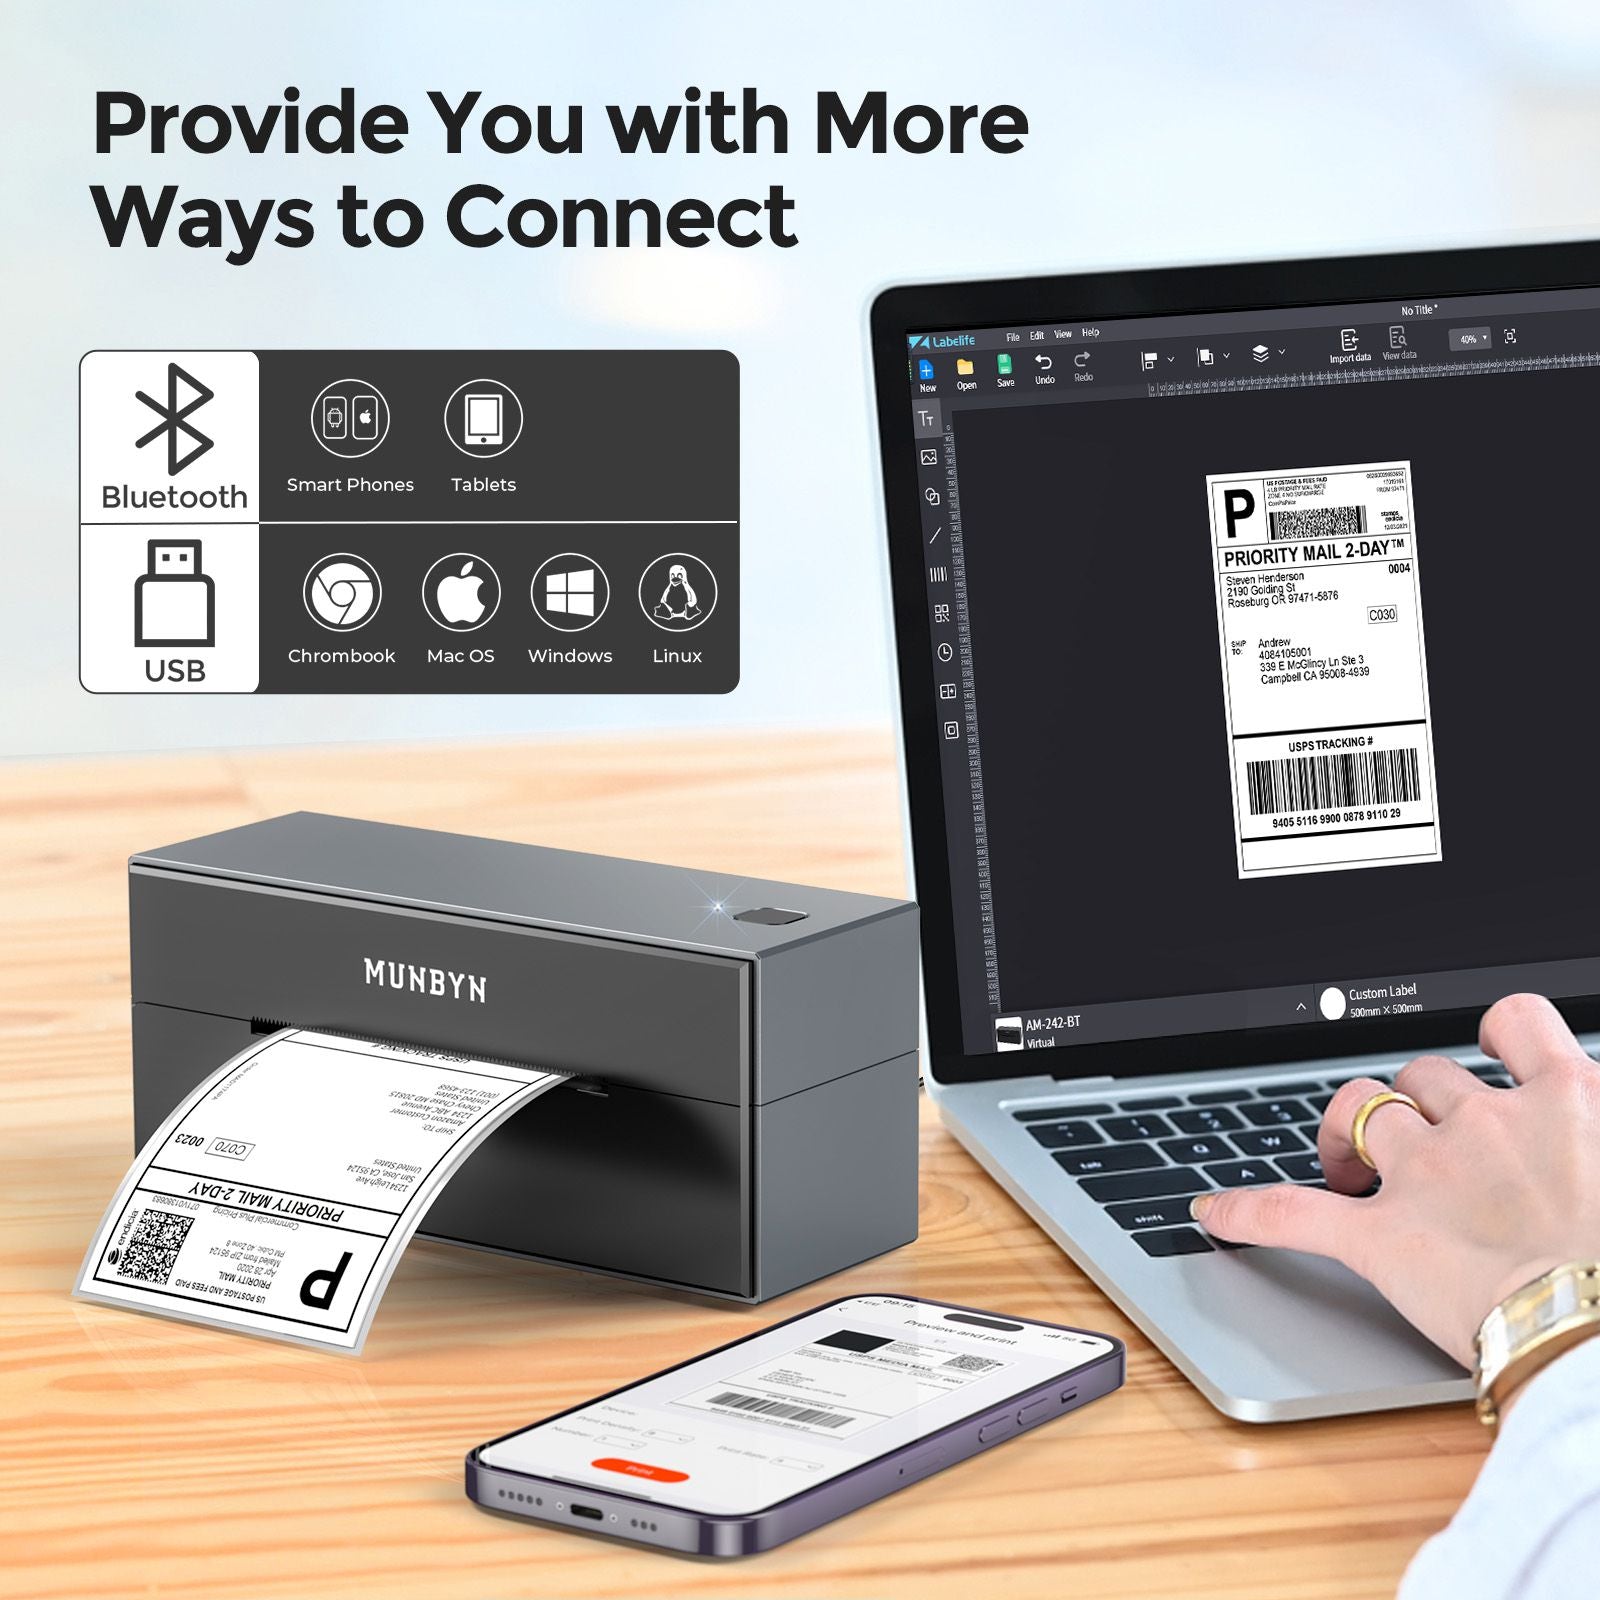 The MUNBYN black wireless Bluetooth printer can be connected to your device via Bluetooth and USB interface. 